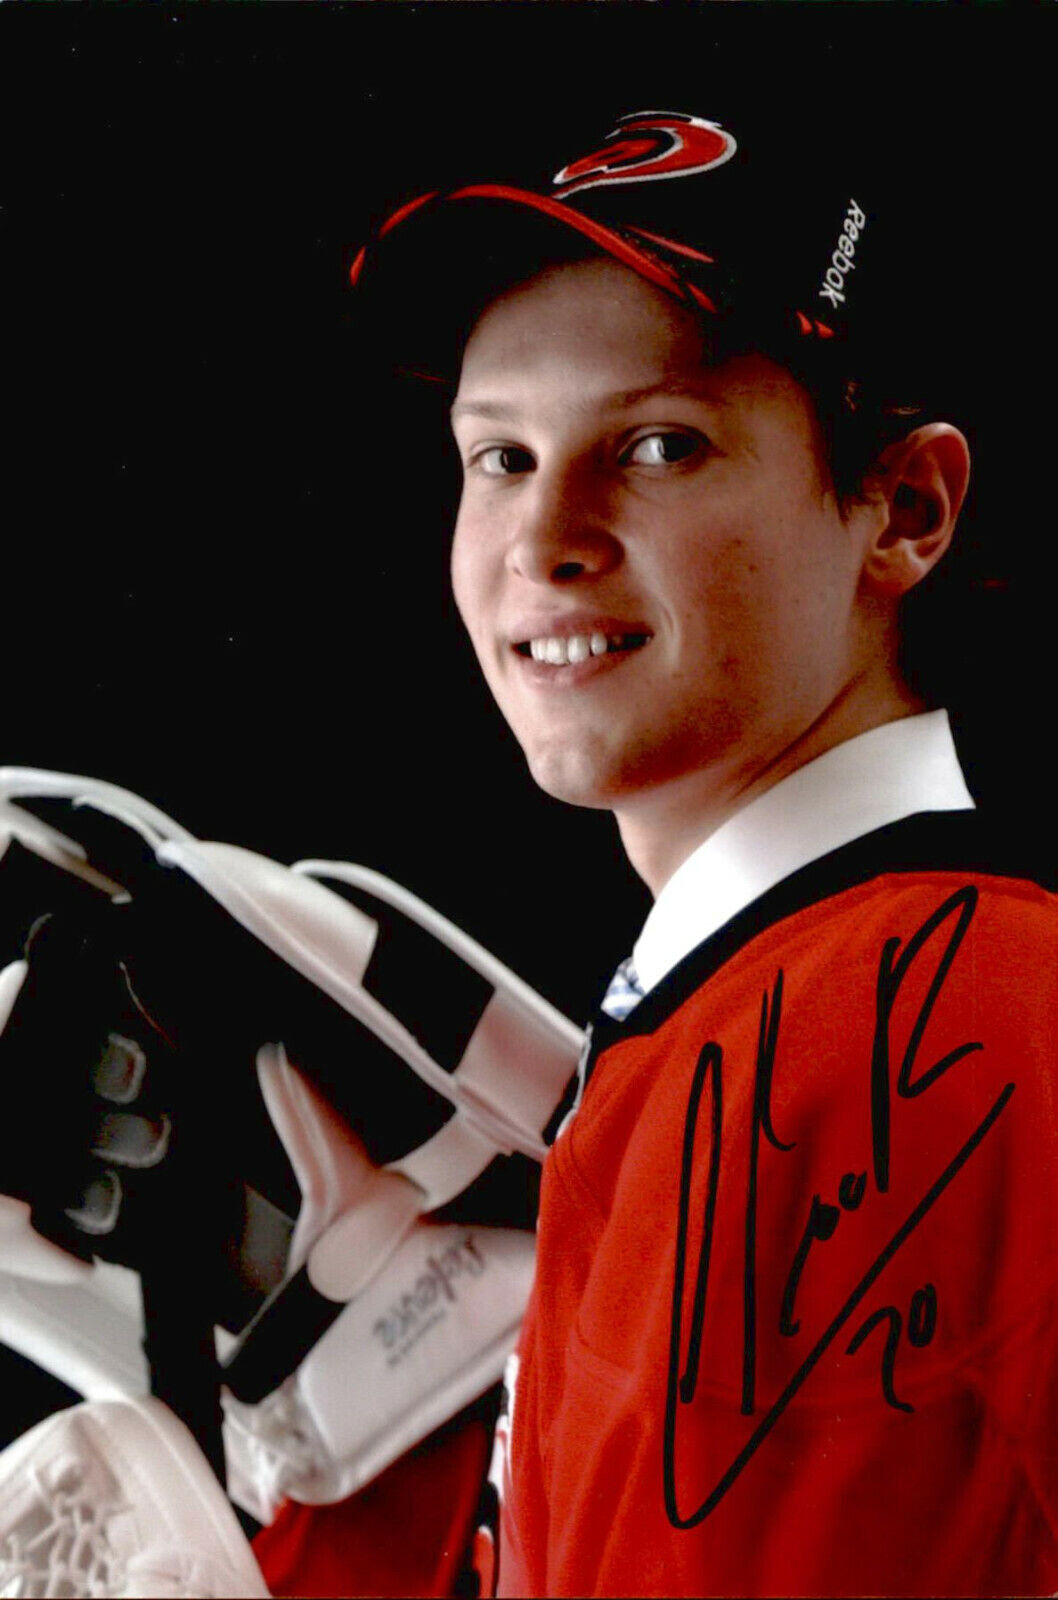 Callum Booth SIGNED autographed 4x6 Photo Poster painting CAROLINA HURRICANES #3